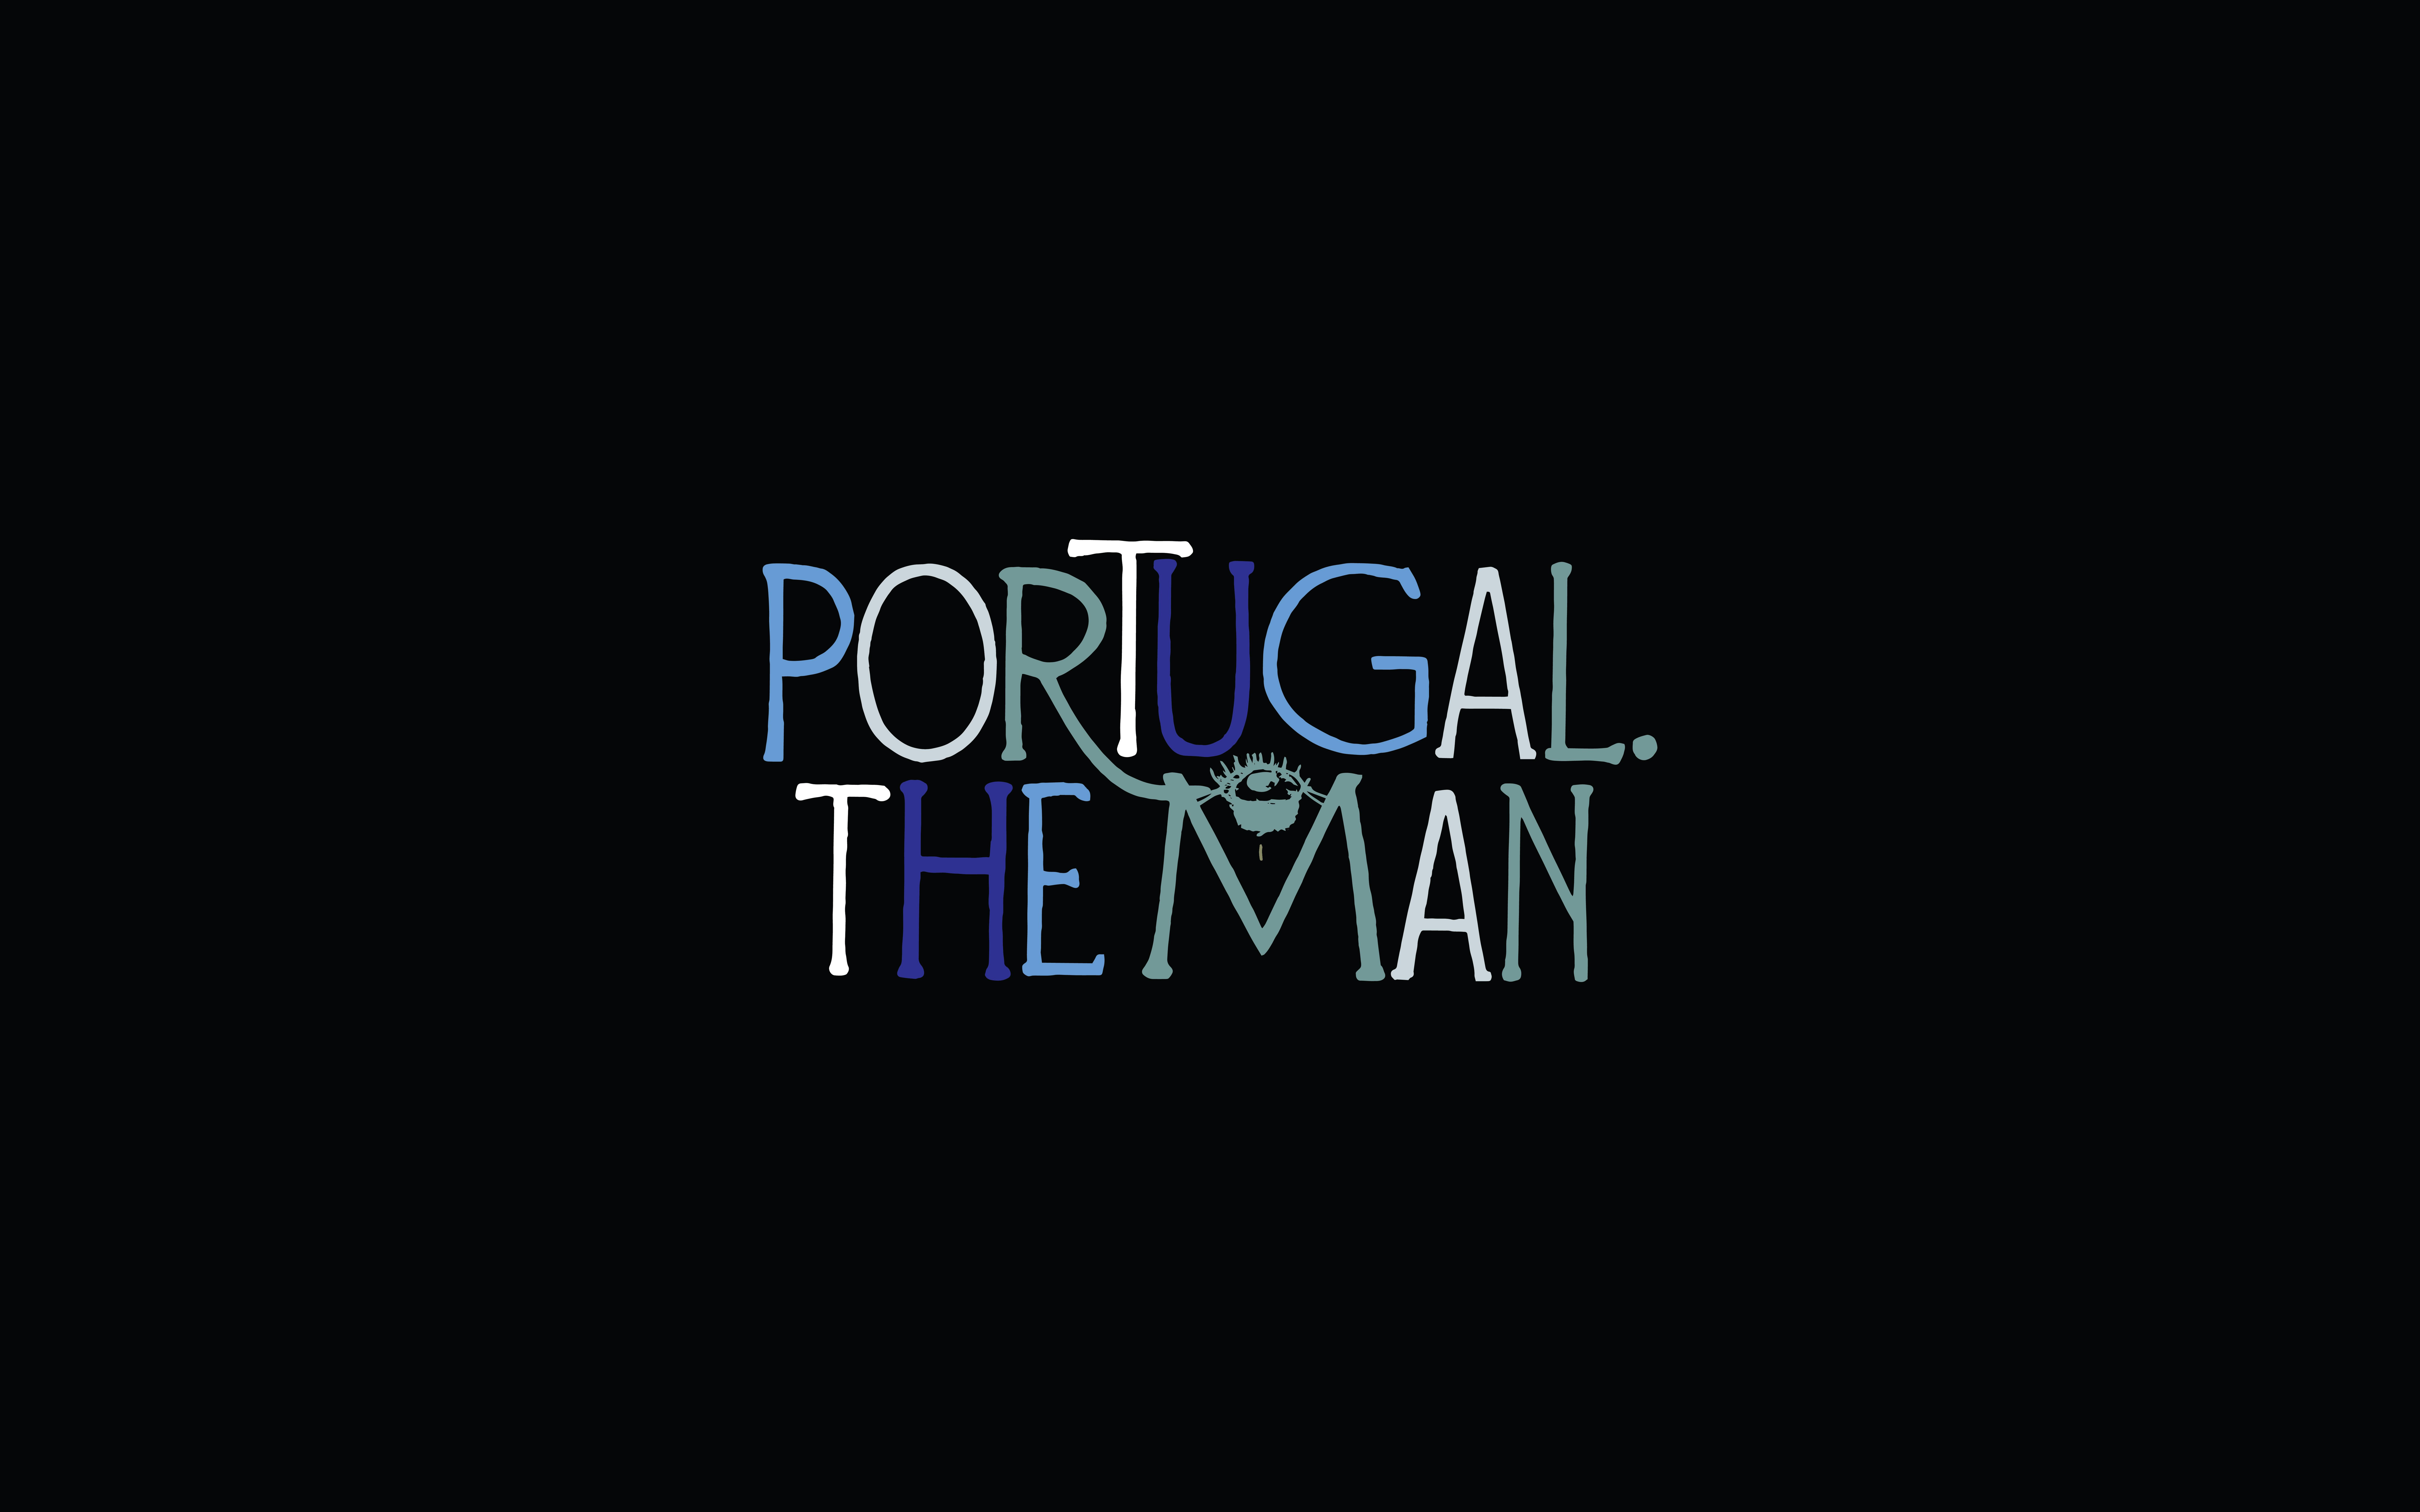 Portugal. The Man Wallpapers? : portugaltheman